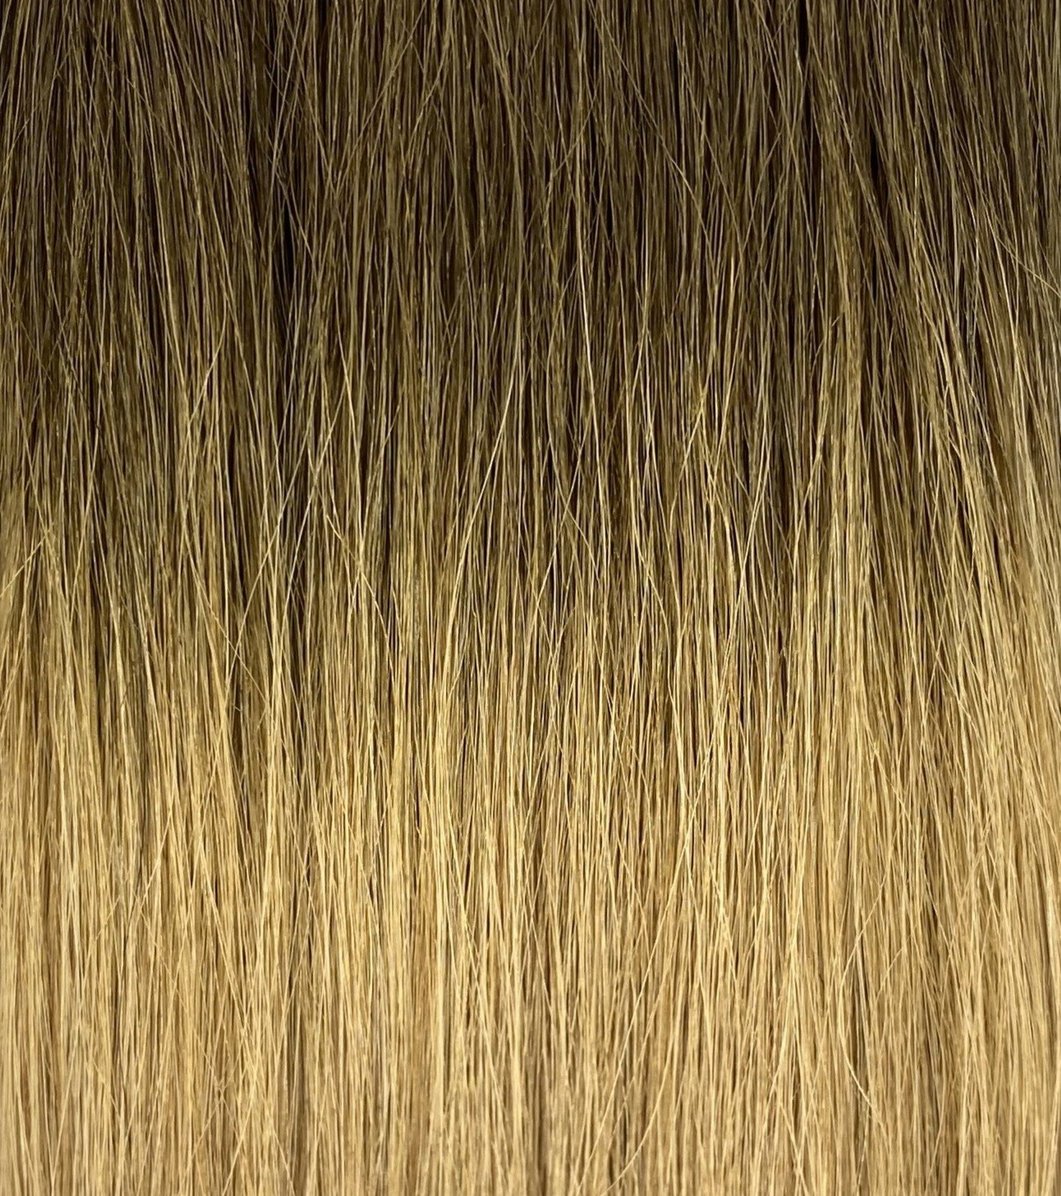 Weft hair extensions #4 &14 - Double - 24 inches - Chestnut into Copper Golden Light Blonde Ombre Weft DR Hair Products Co 